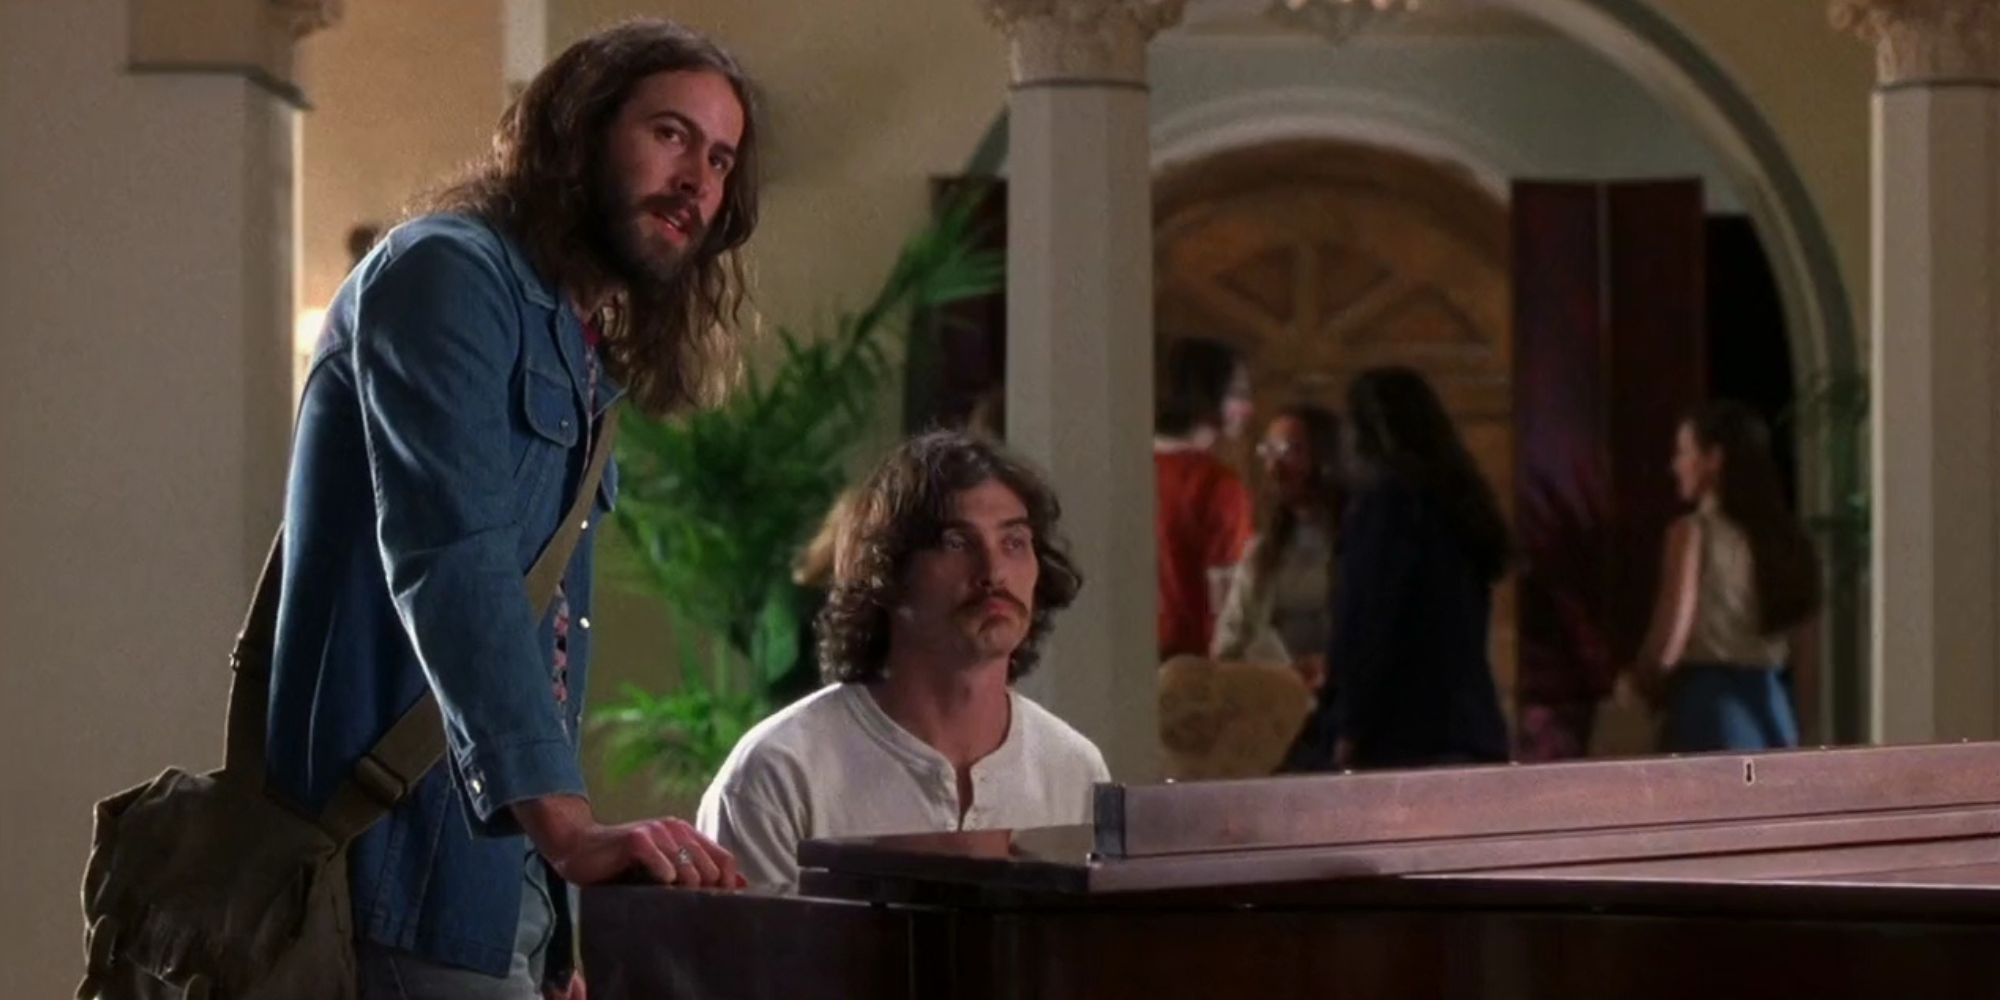 russell and jeff in almost famous play piano and cohort in the hotel